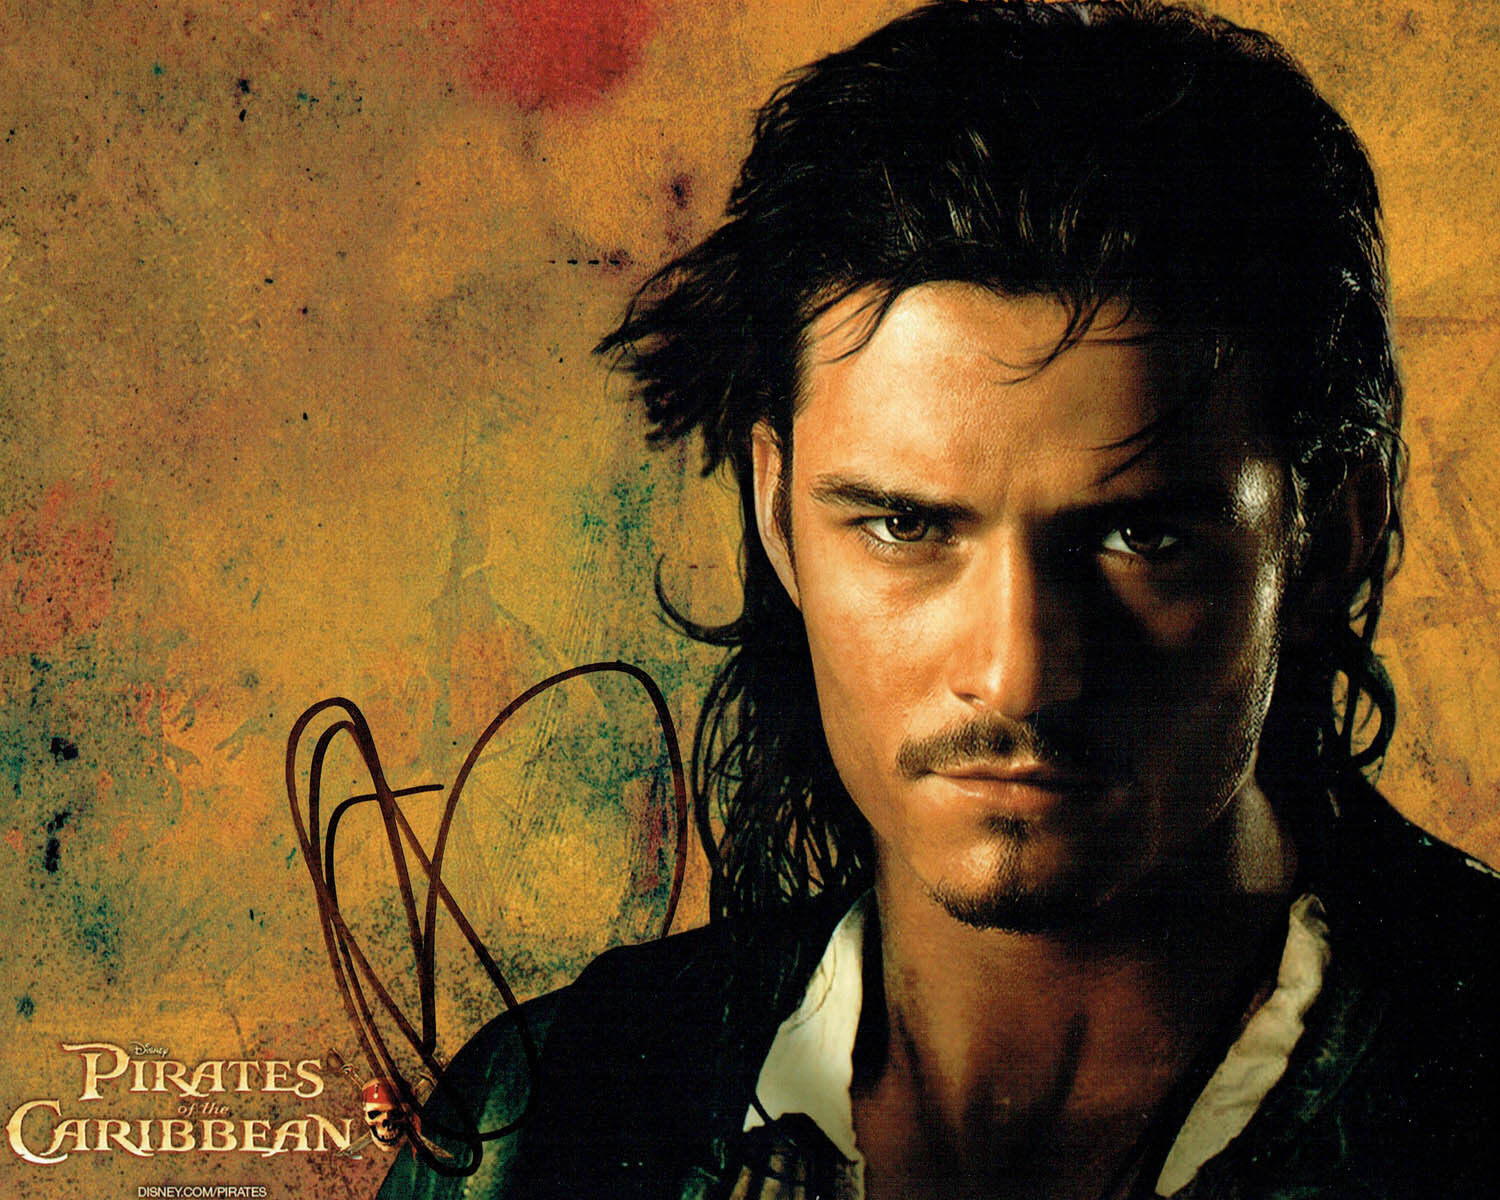 Orlando BLOOM Signed Autograph 10x8 Pirates of the Caribbean Photo Poster painting AFTAL COA